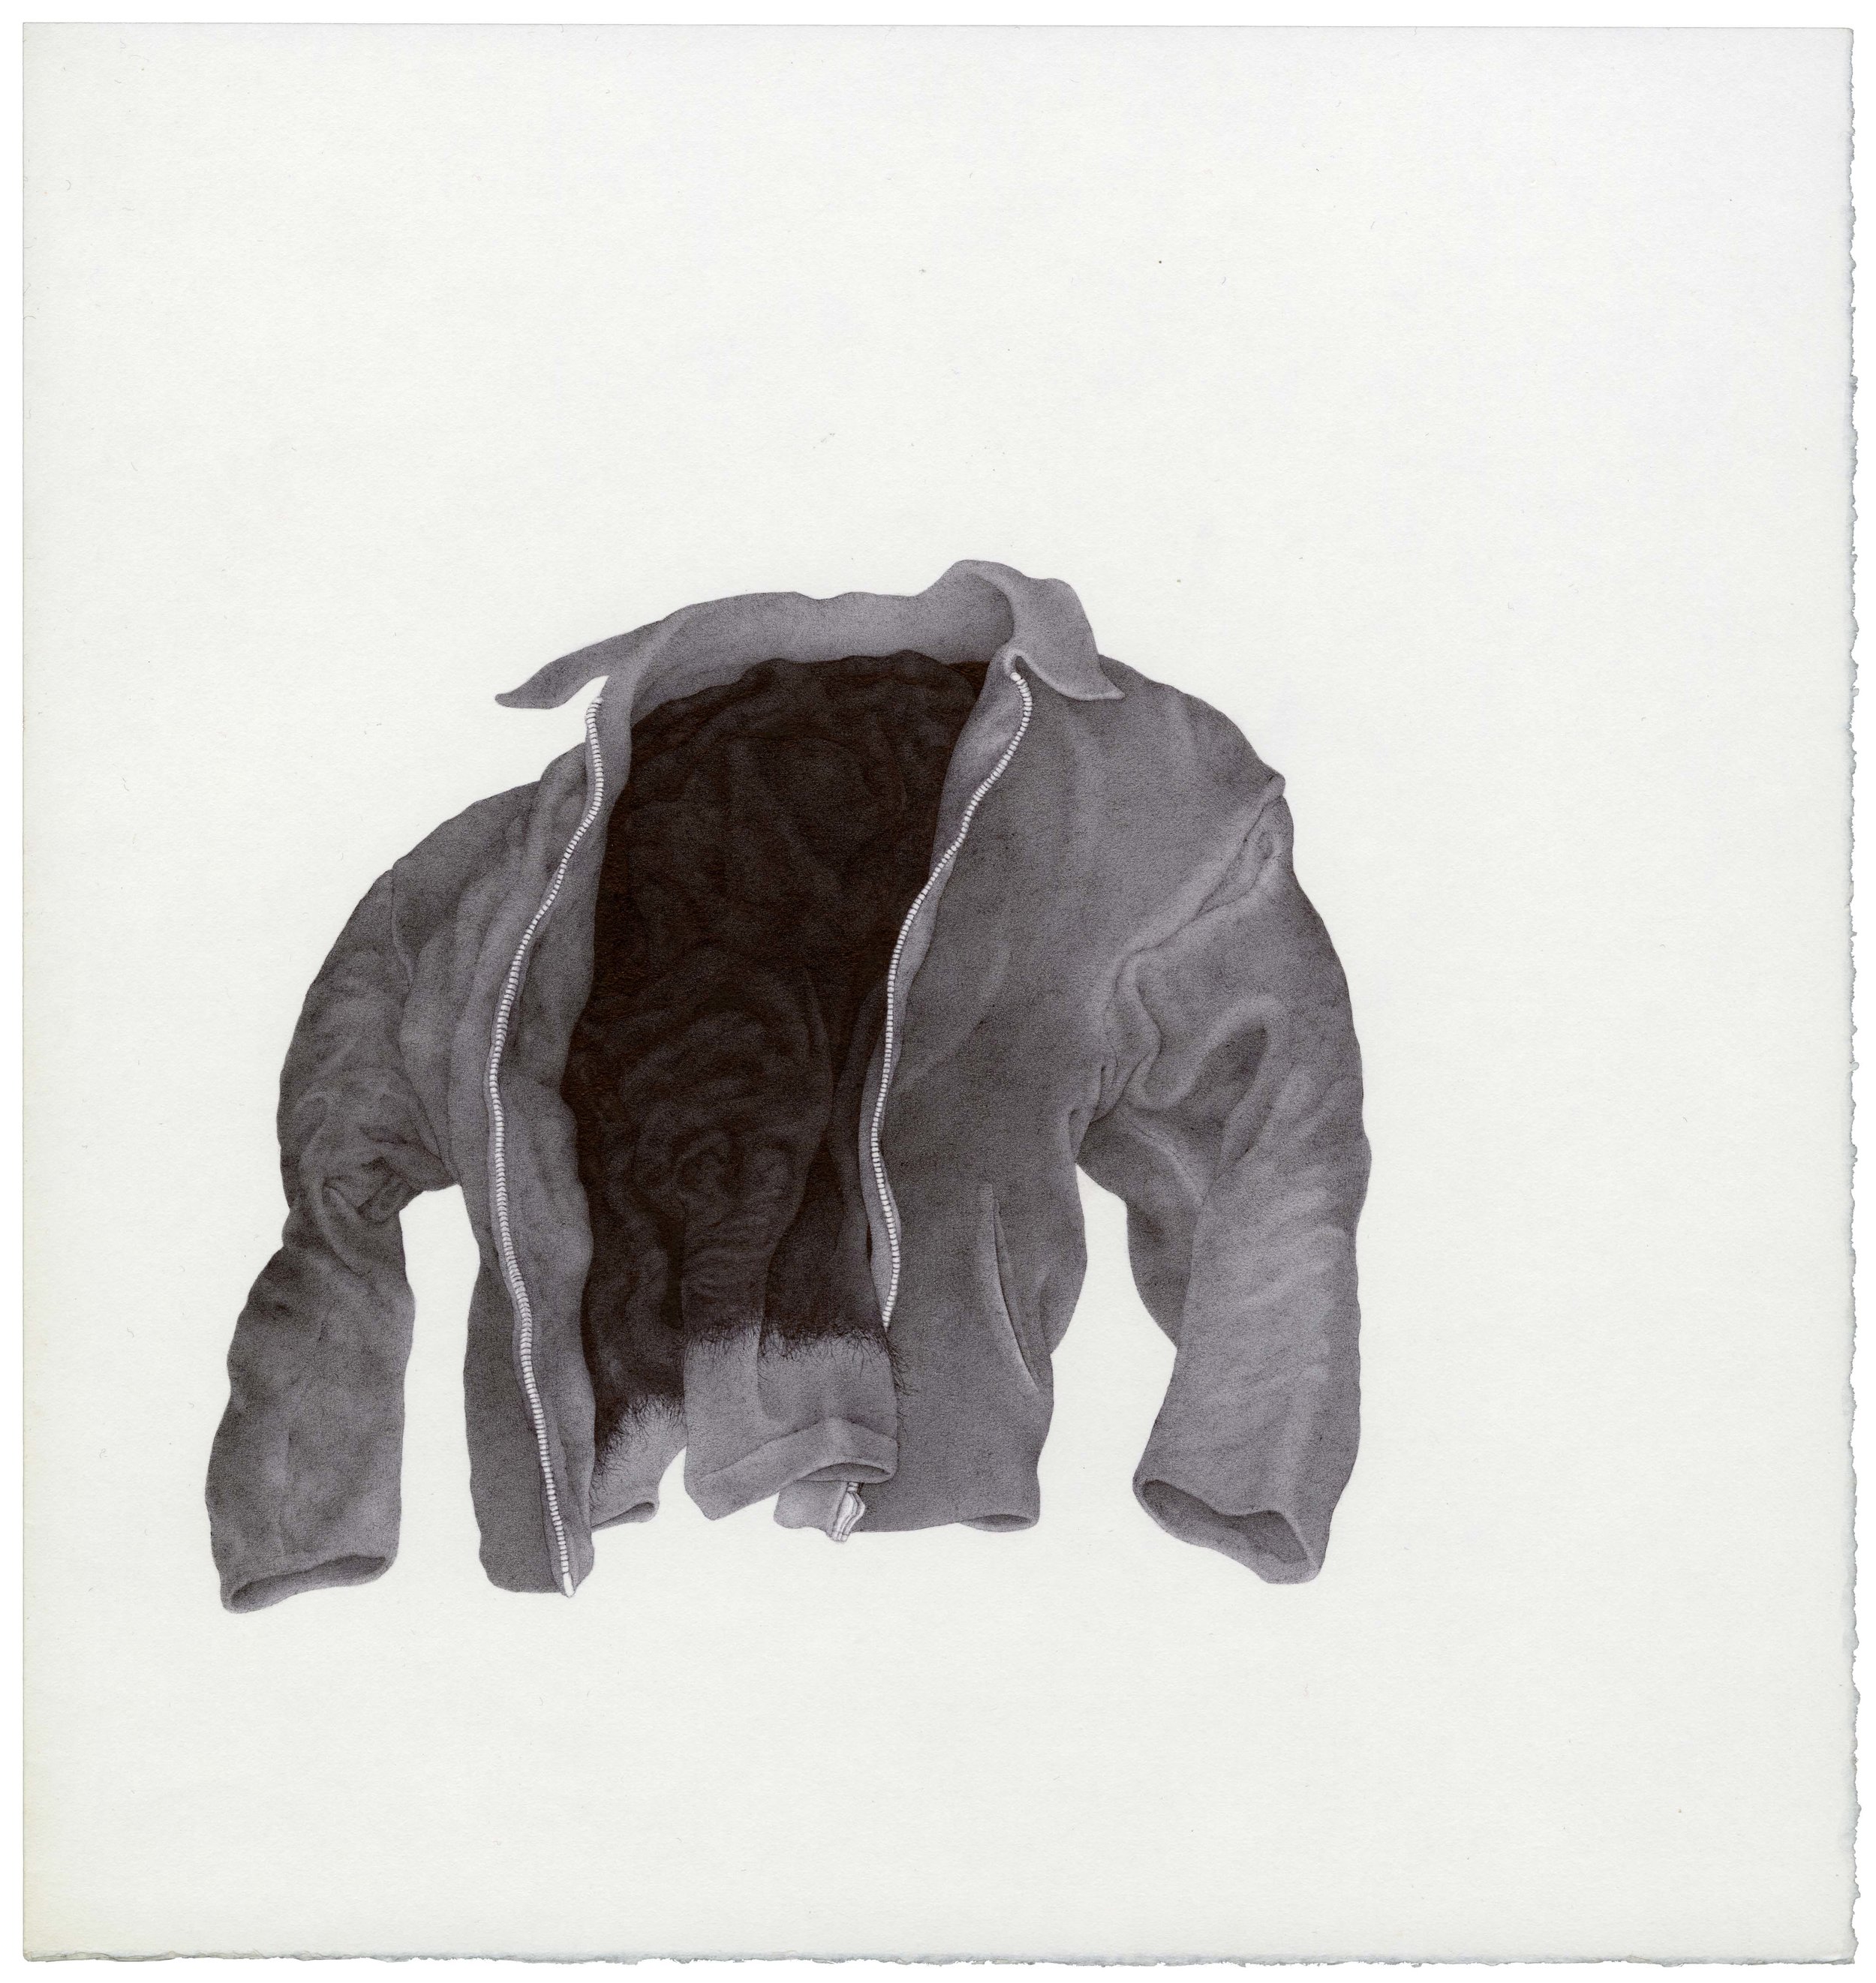 Drawing of a dark jacket floating in air